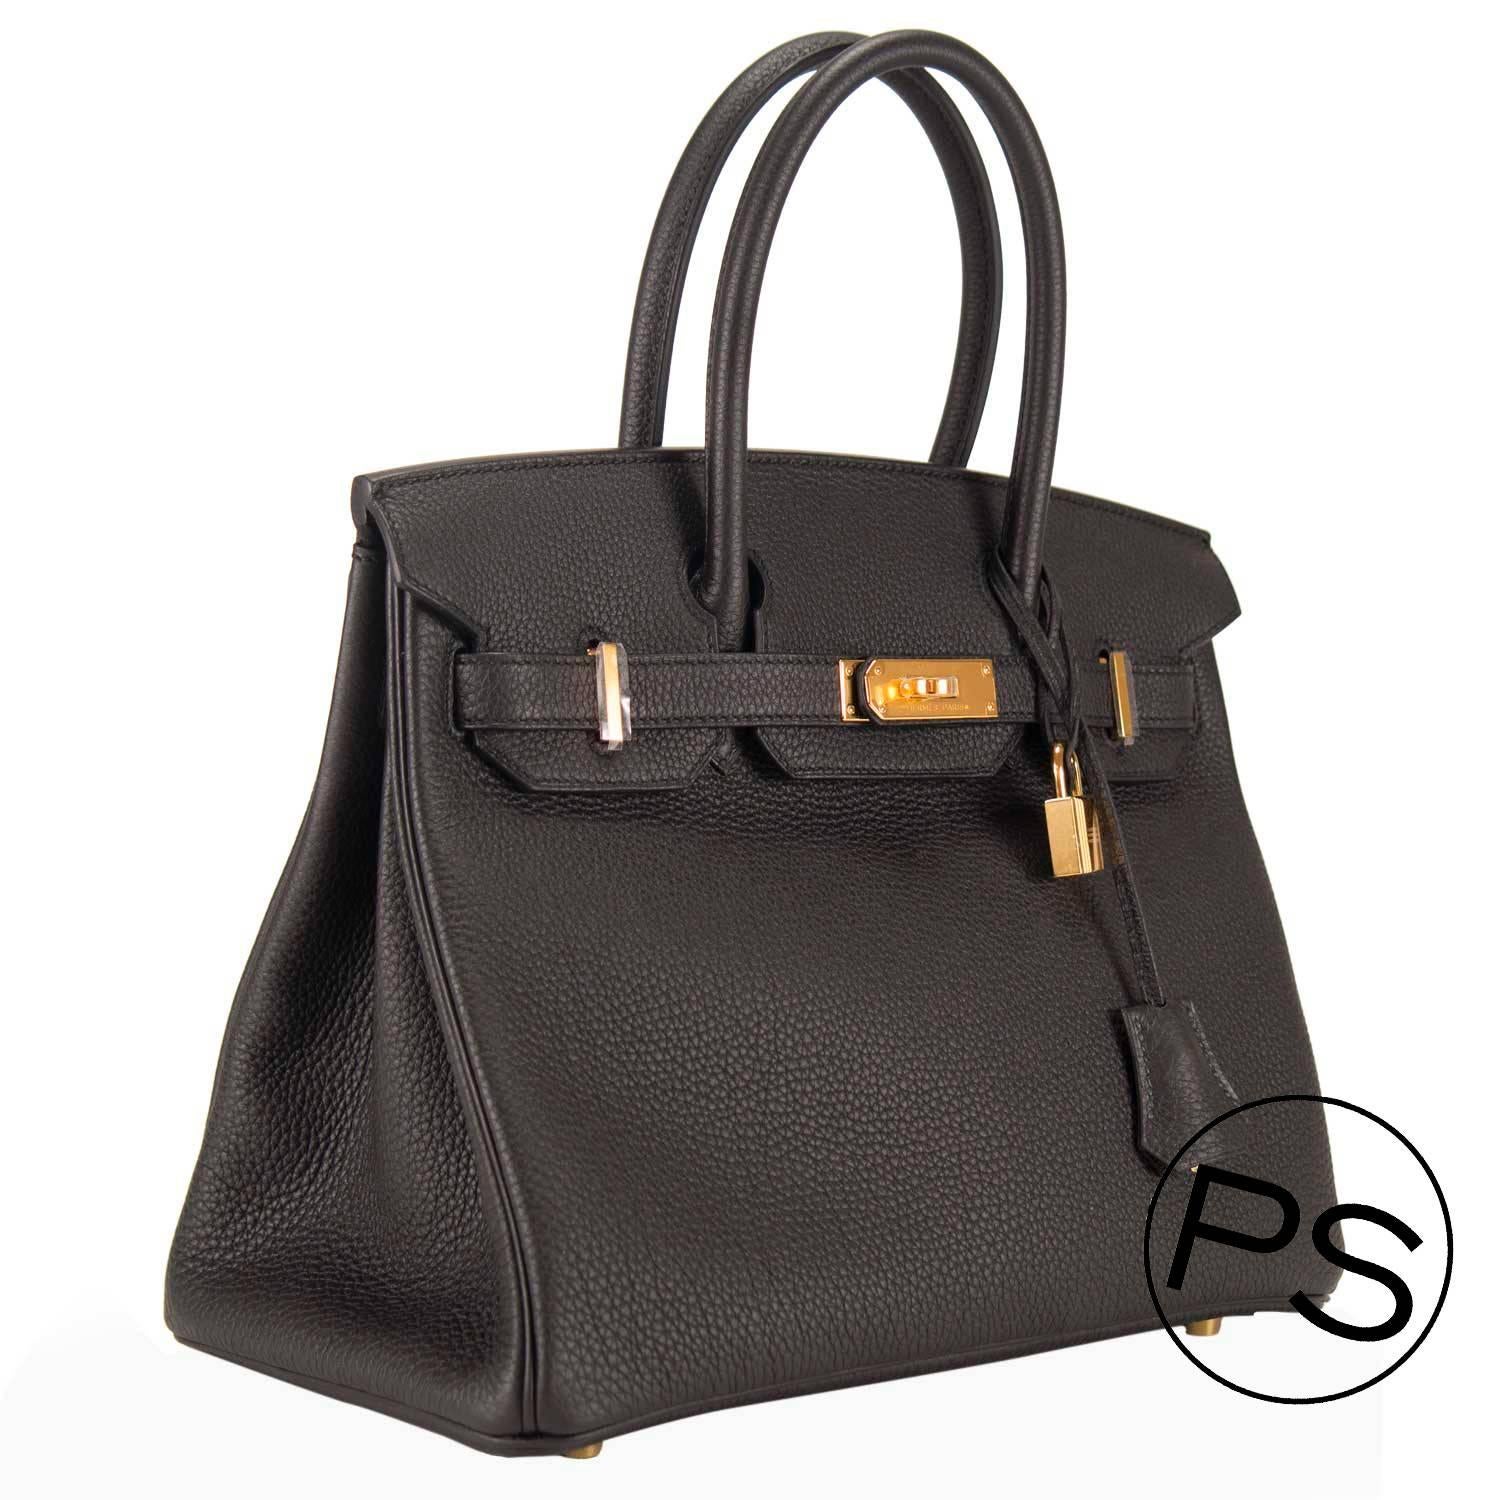 Hermes Handbag Birkin 30 Togo Black Gold Hardware 2015.

Bought it in Hermes store in 2015.

Pre-owned and never used.

Model: BIRKIN

Dimension: 30cm width x 22cm height x 16cm length.

Leather: Togo.

Color: Black.

Details:

With